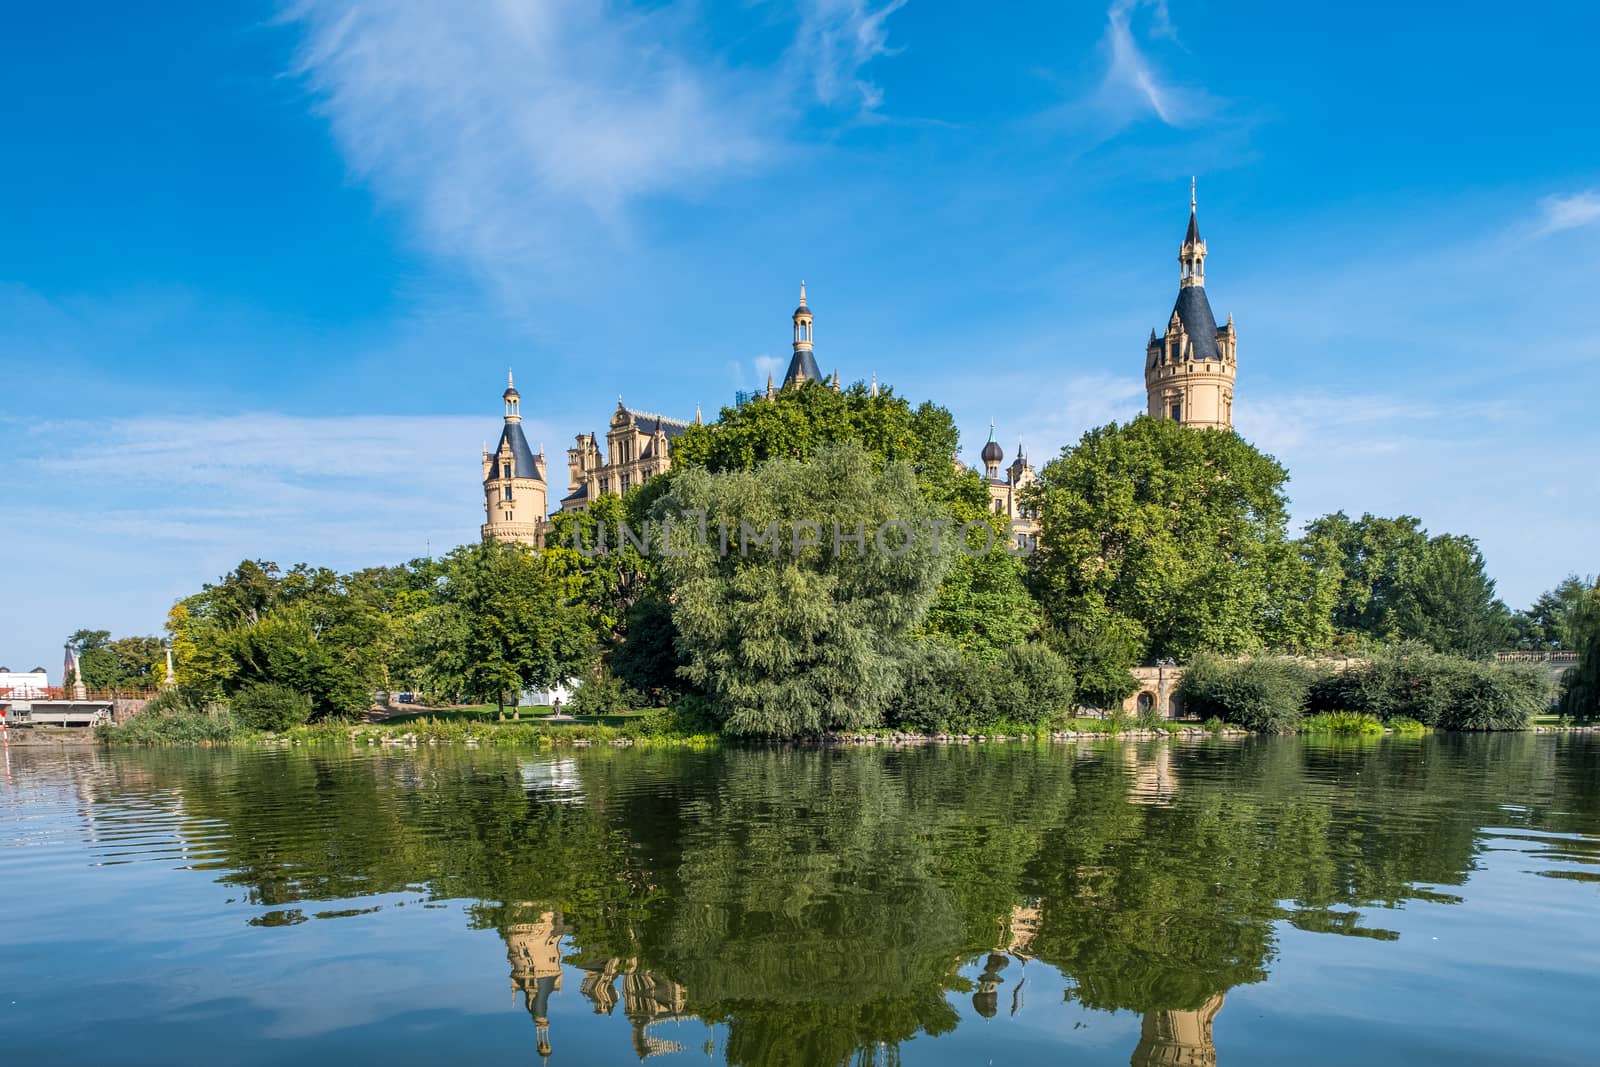 A beautiful fairy-tale castle in Schwerin, the view from the lake by Fischeron